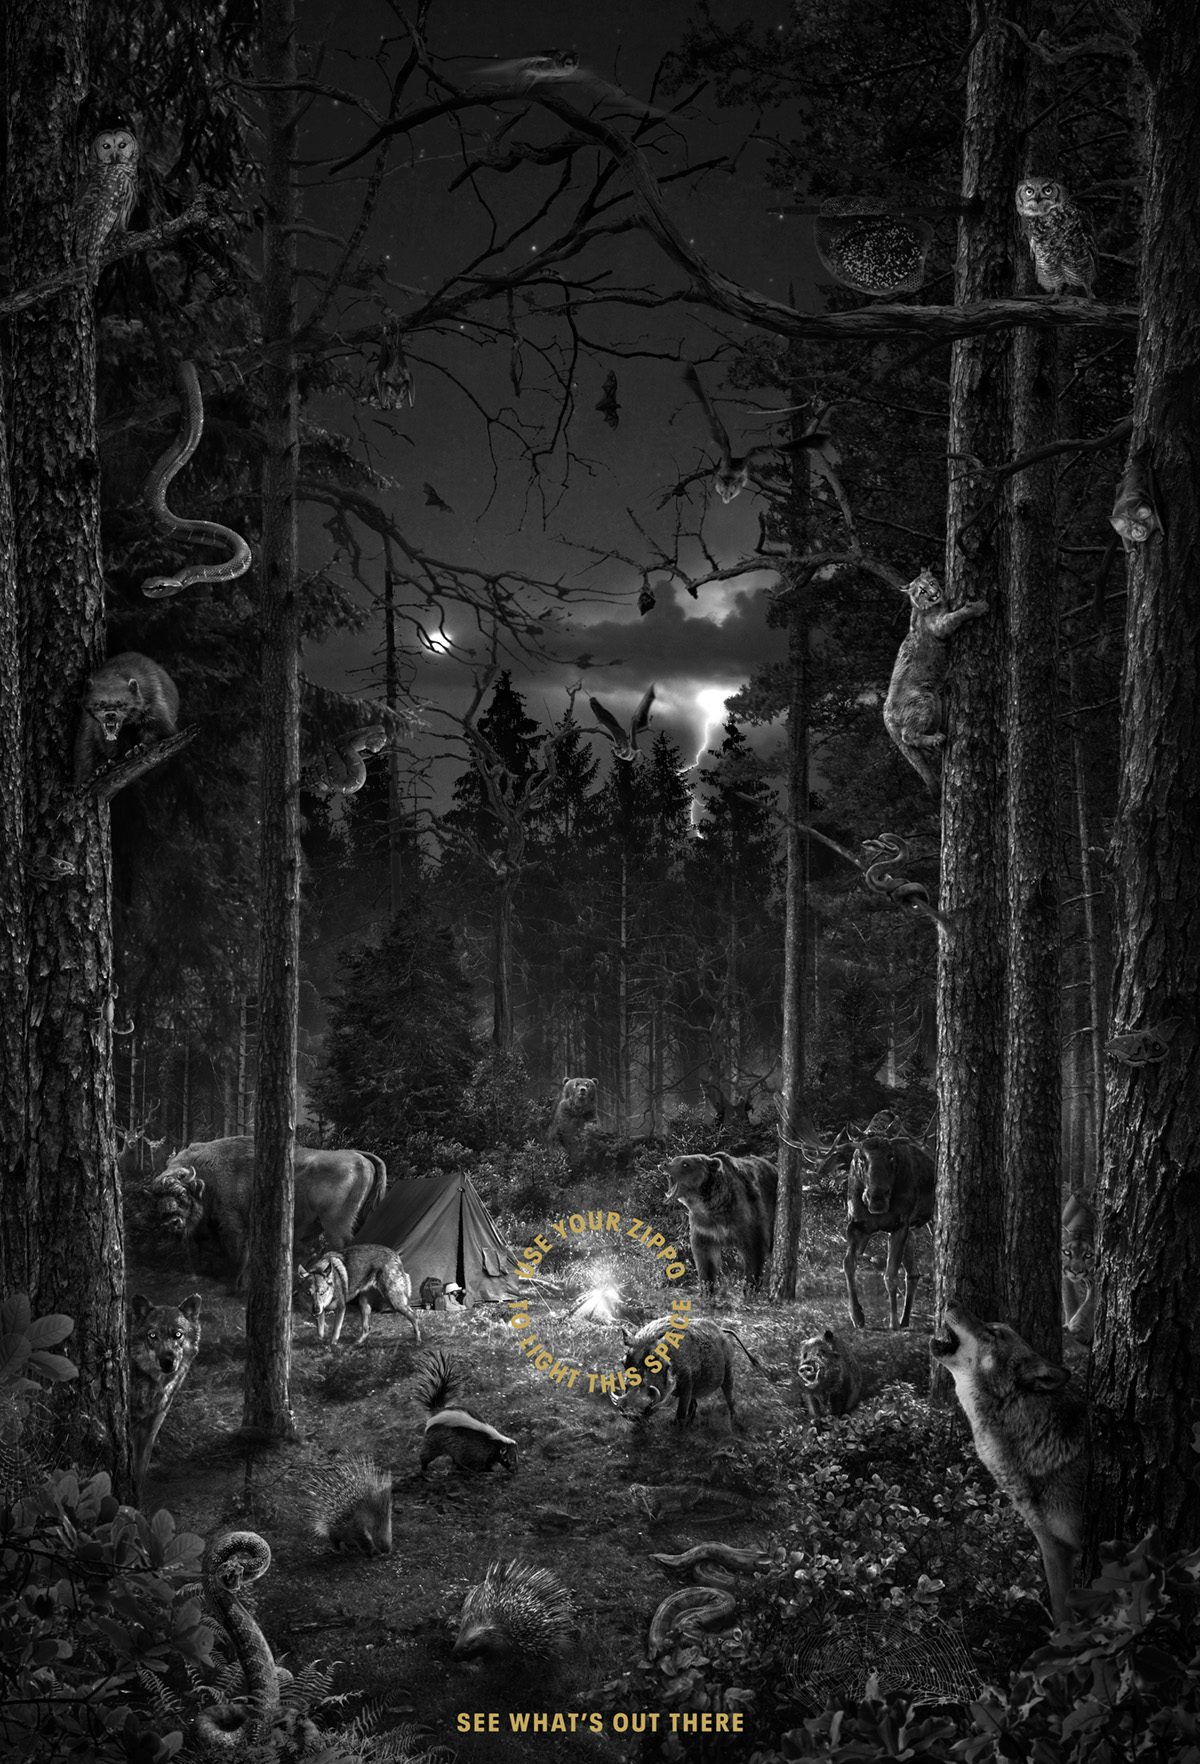 Black and white poster created for Zippo showing a forest scene